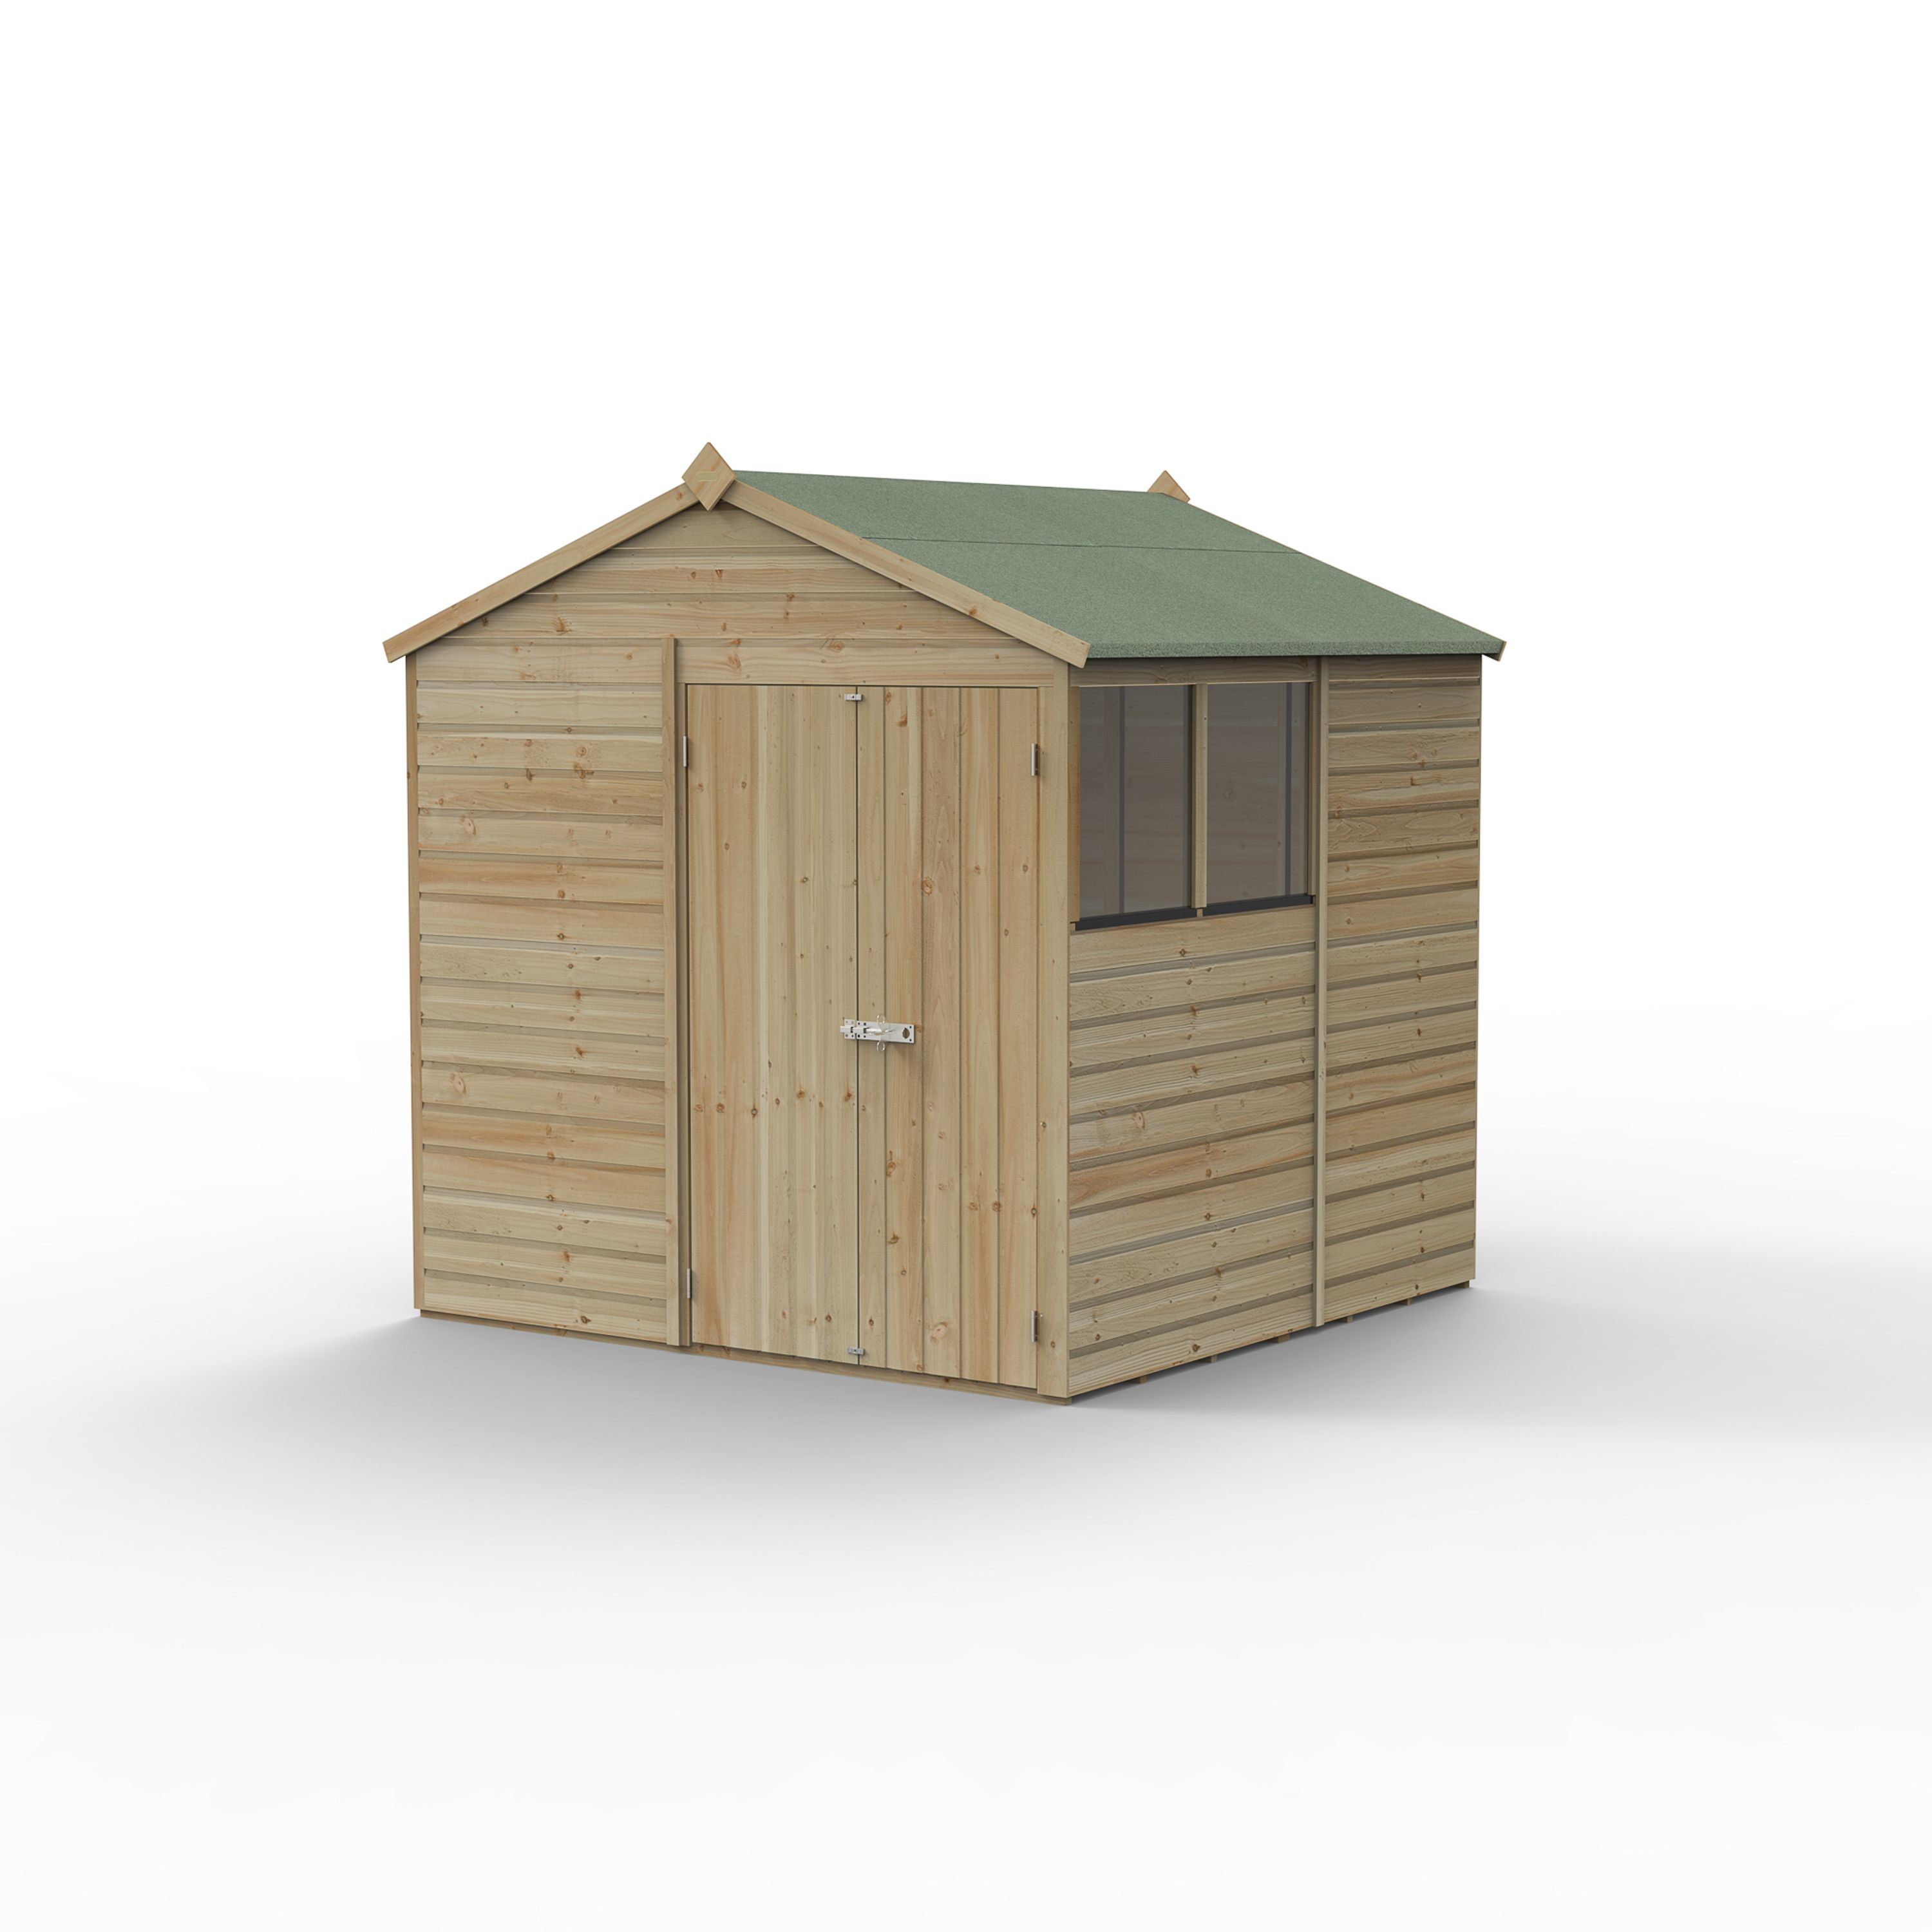 Forest Garden Beckwood 7x7 ft Apex Natural timber Wooden 2 door Shed with floor & 2 windows (Base included) - Assembly not required